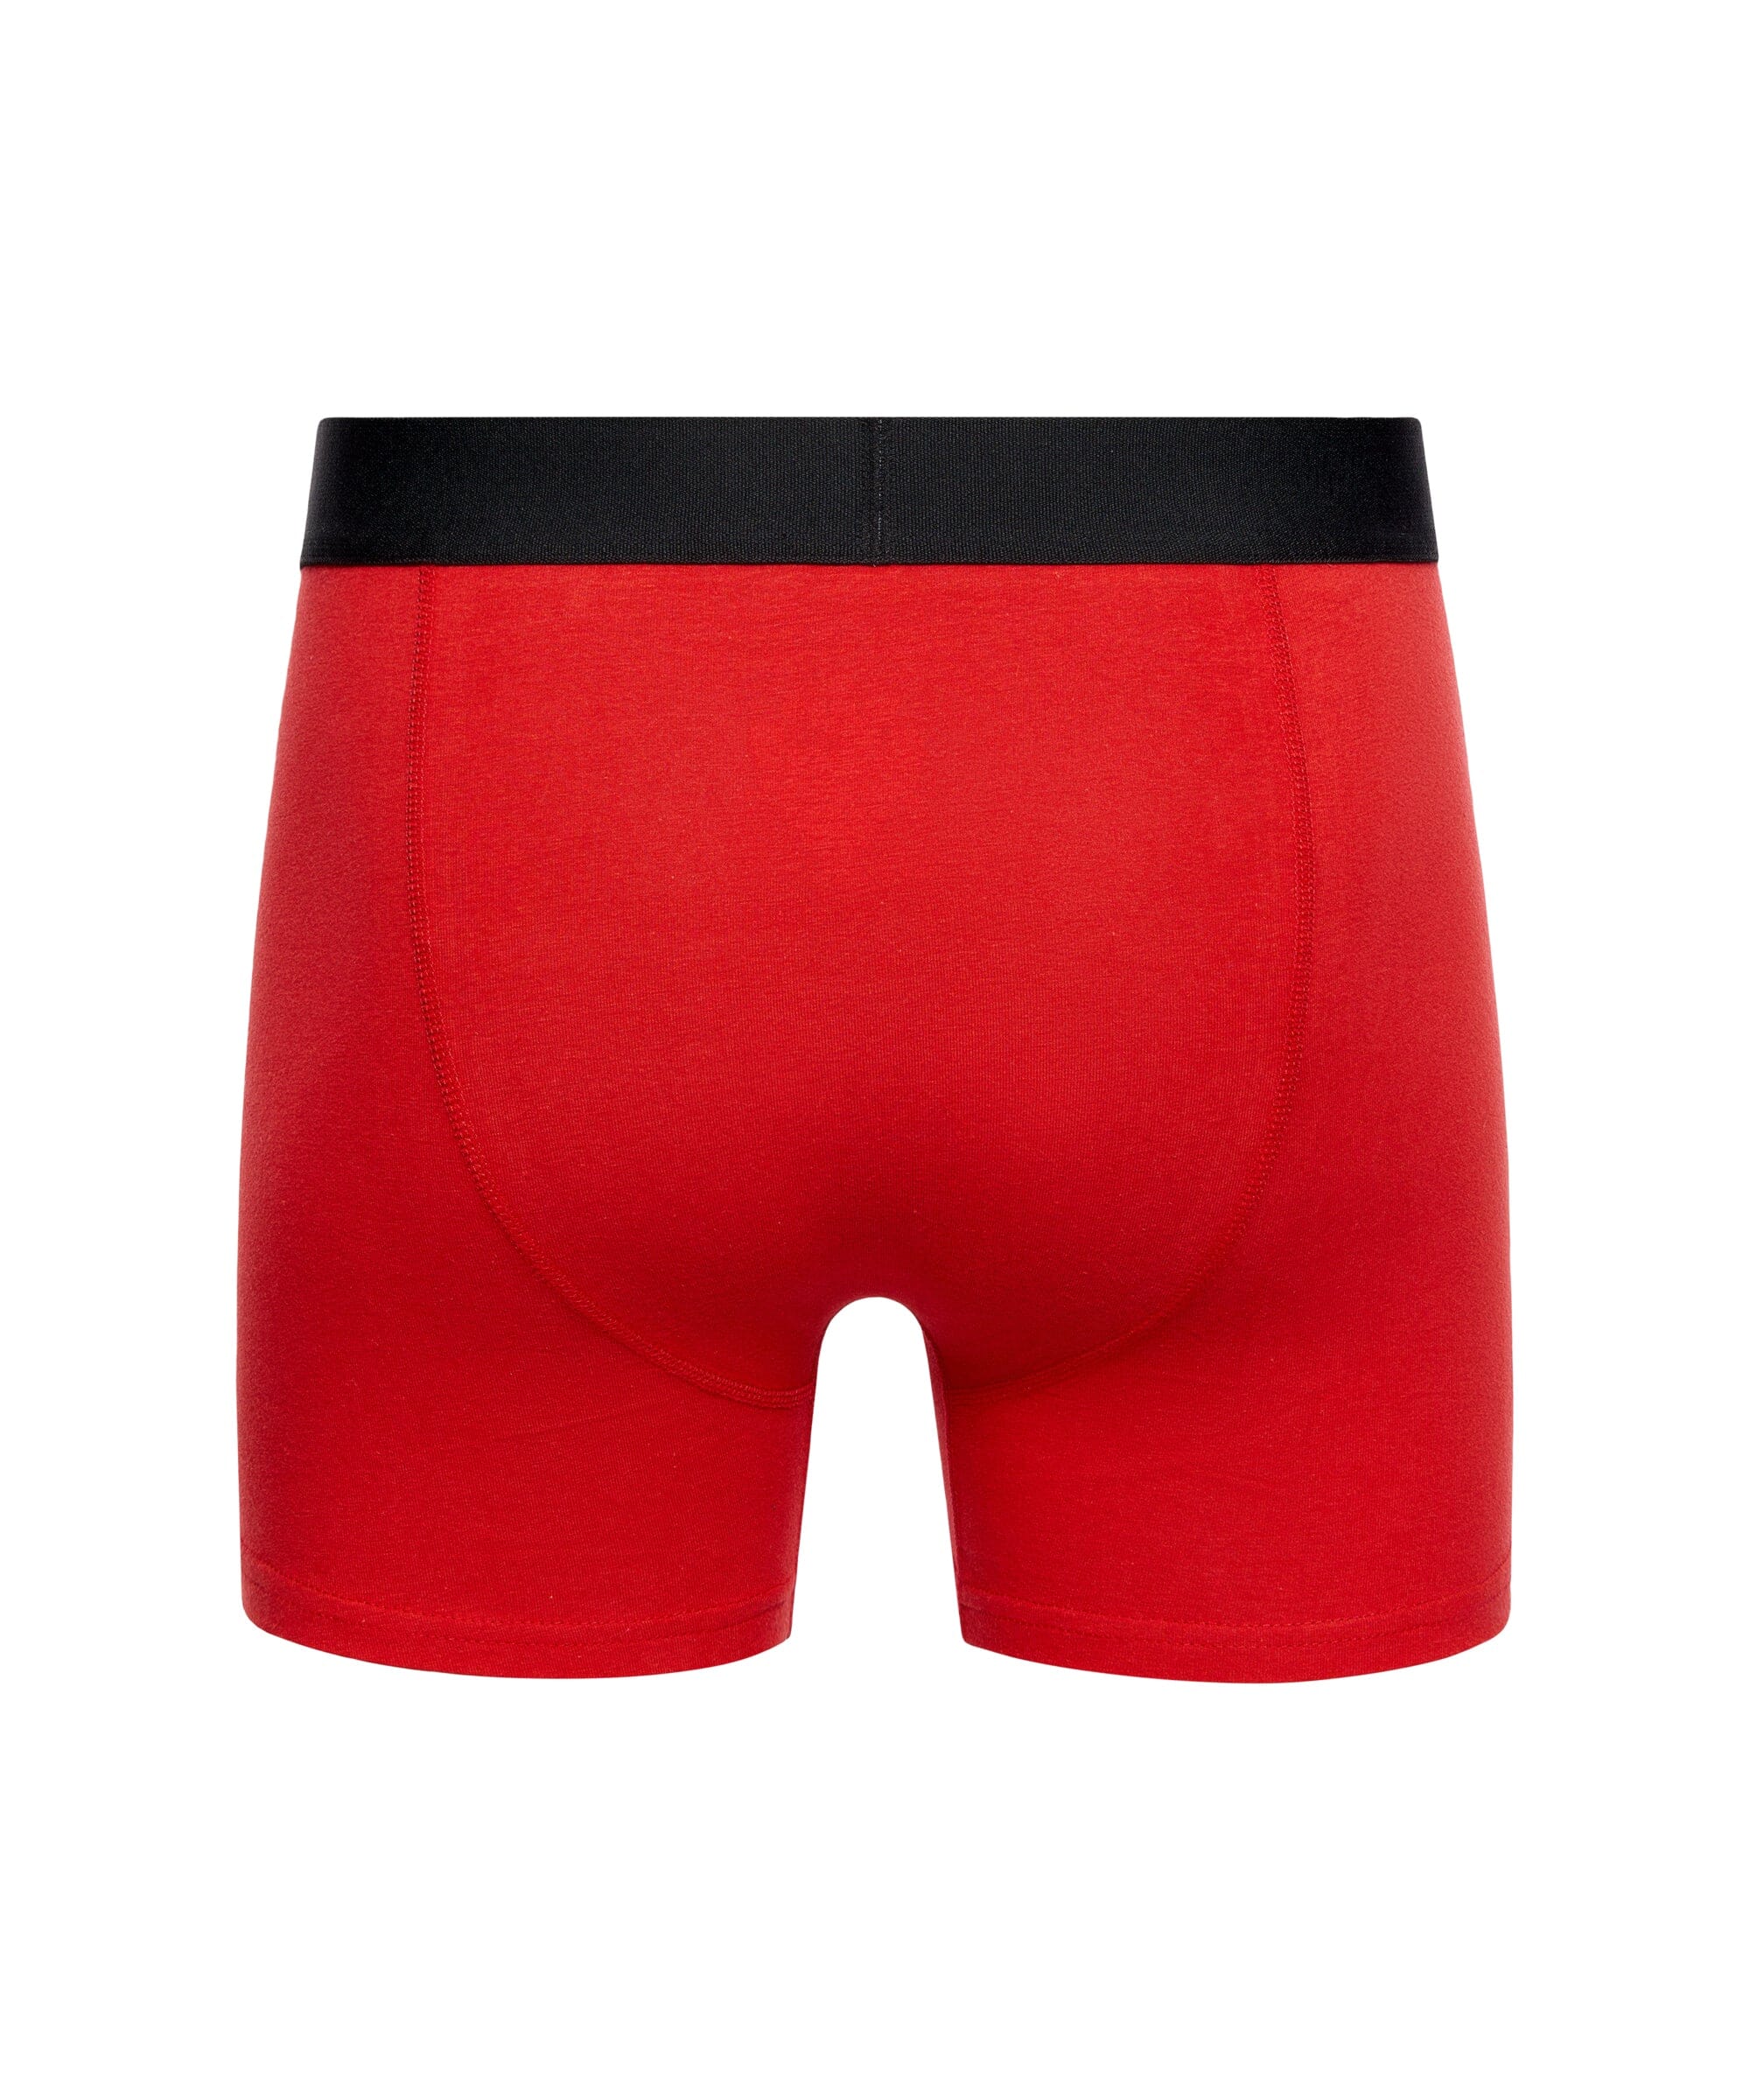 Fiery Boxers 3pk Assorted